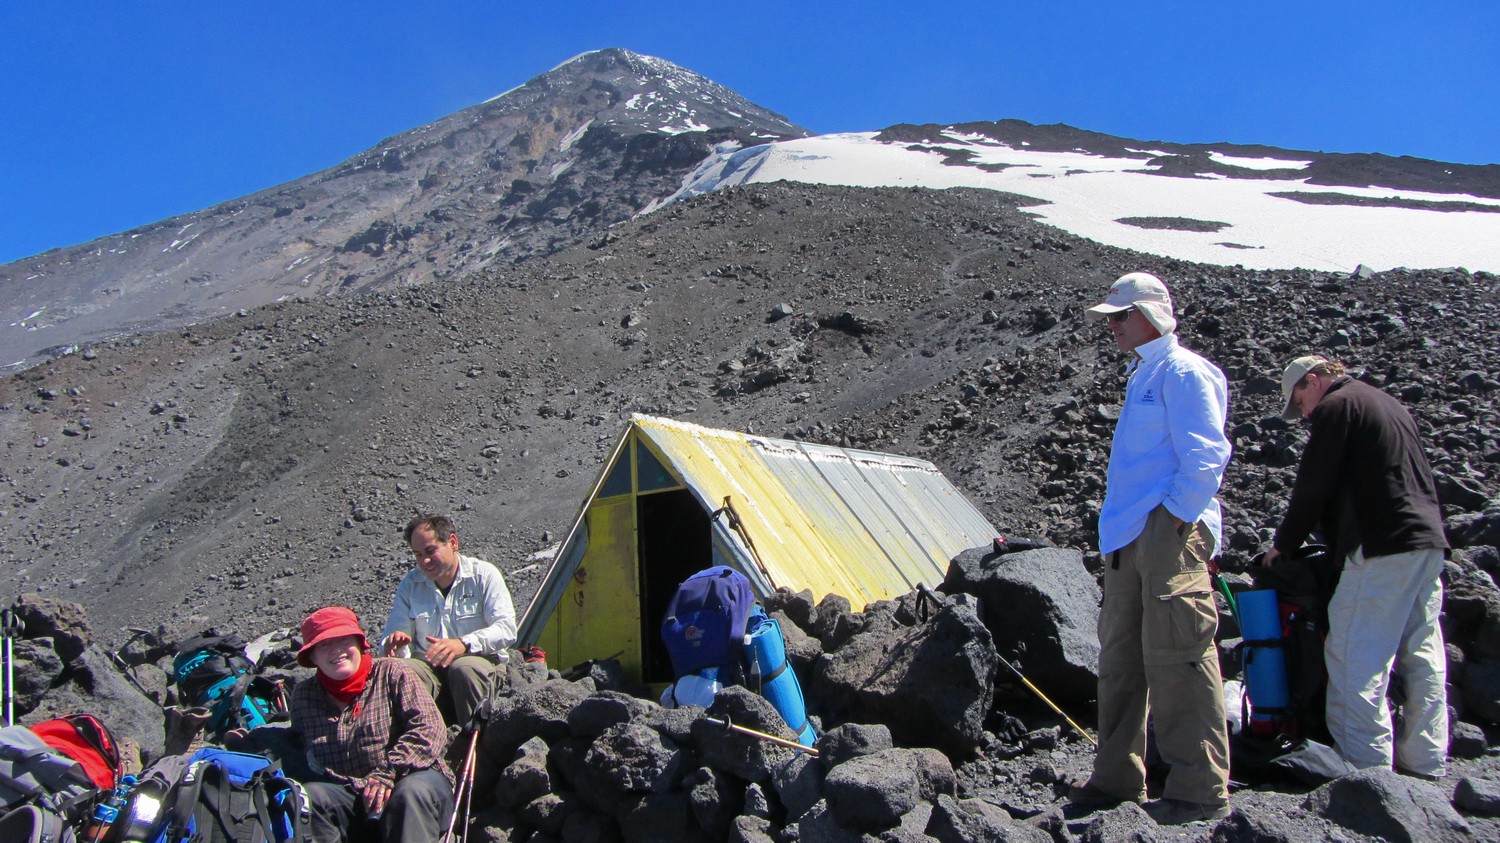 The second hut Refugio CAJA at 2600 meters sea level on the way to Volcan Lanin